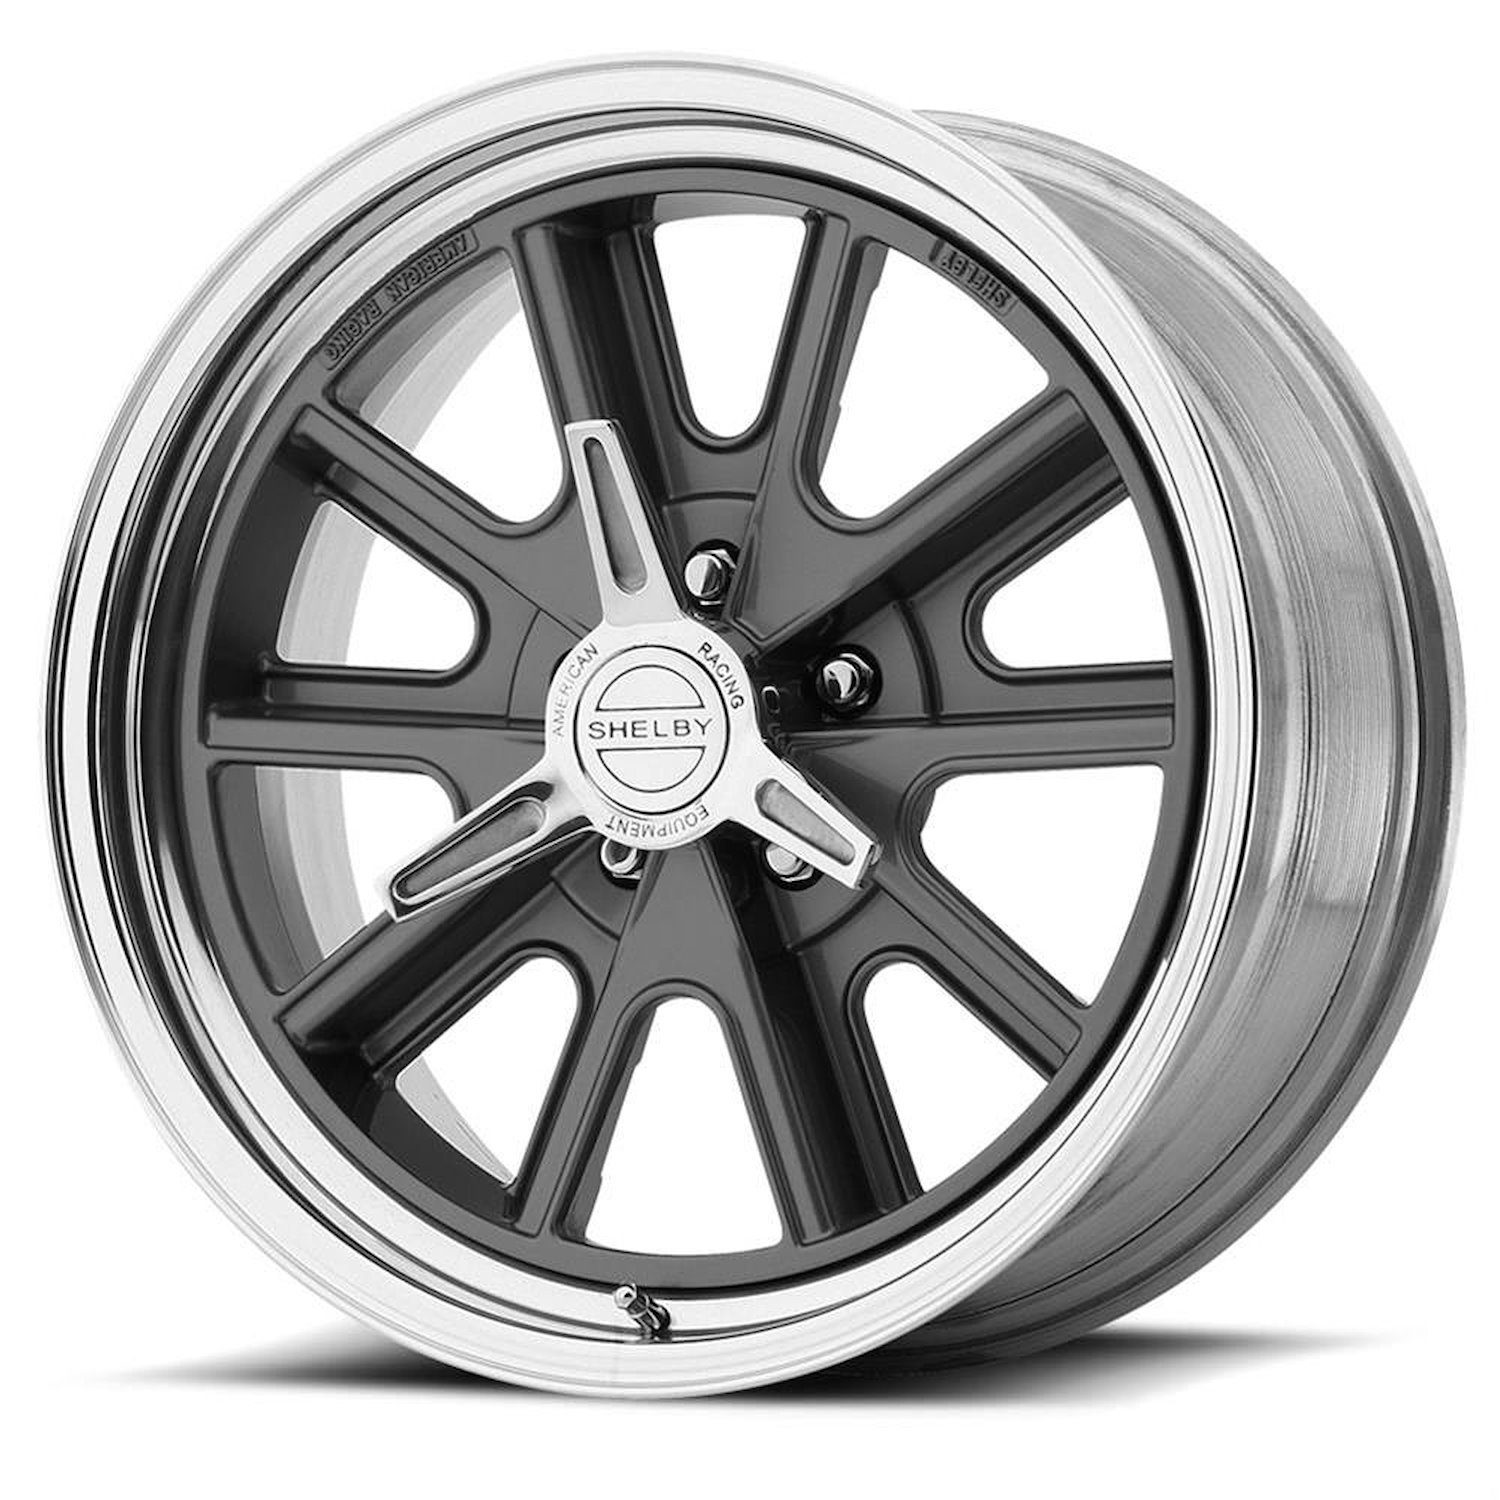 AMERICAN RACING 427 SHELBY COBRA TWO-PIECE MAG GRAY CENTER POLISHED BARREL 15 x 10 5X4.75 -57 3.26